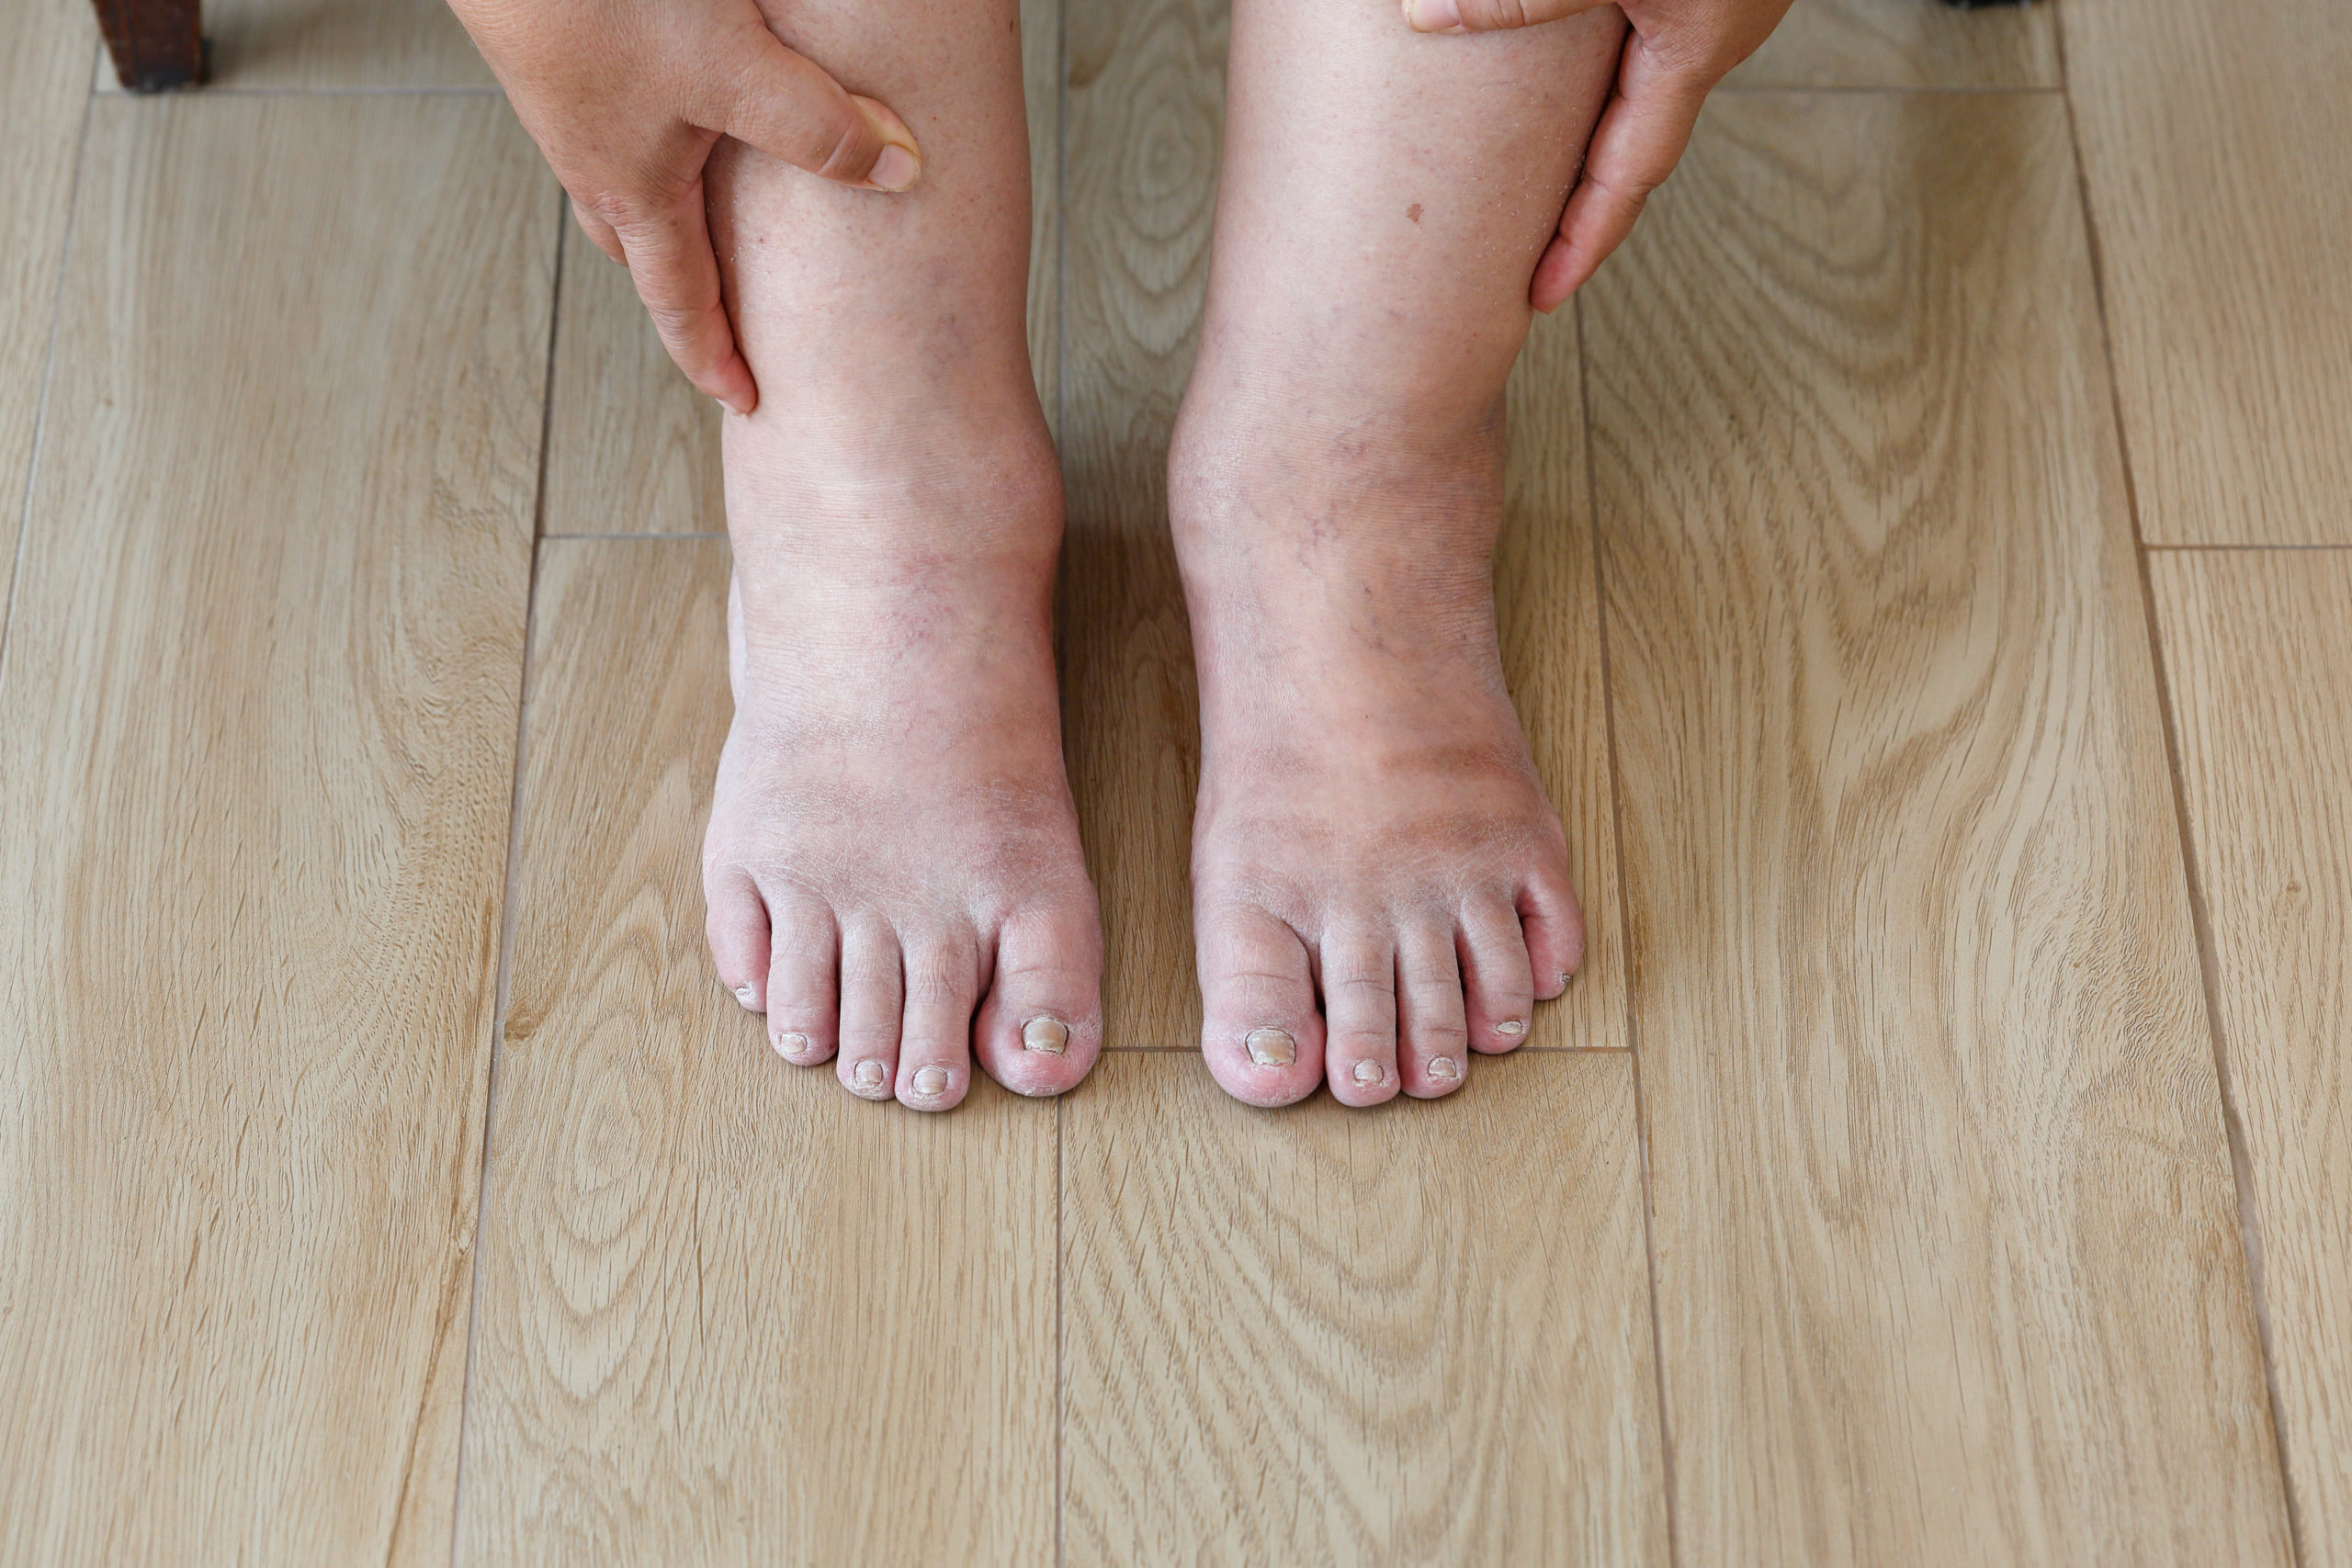 Why Do Feet Swell Up In The Heat? – My FootDr